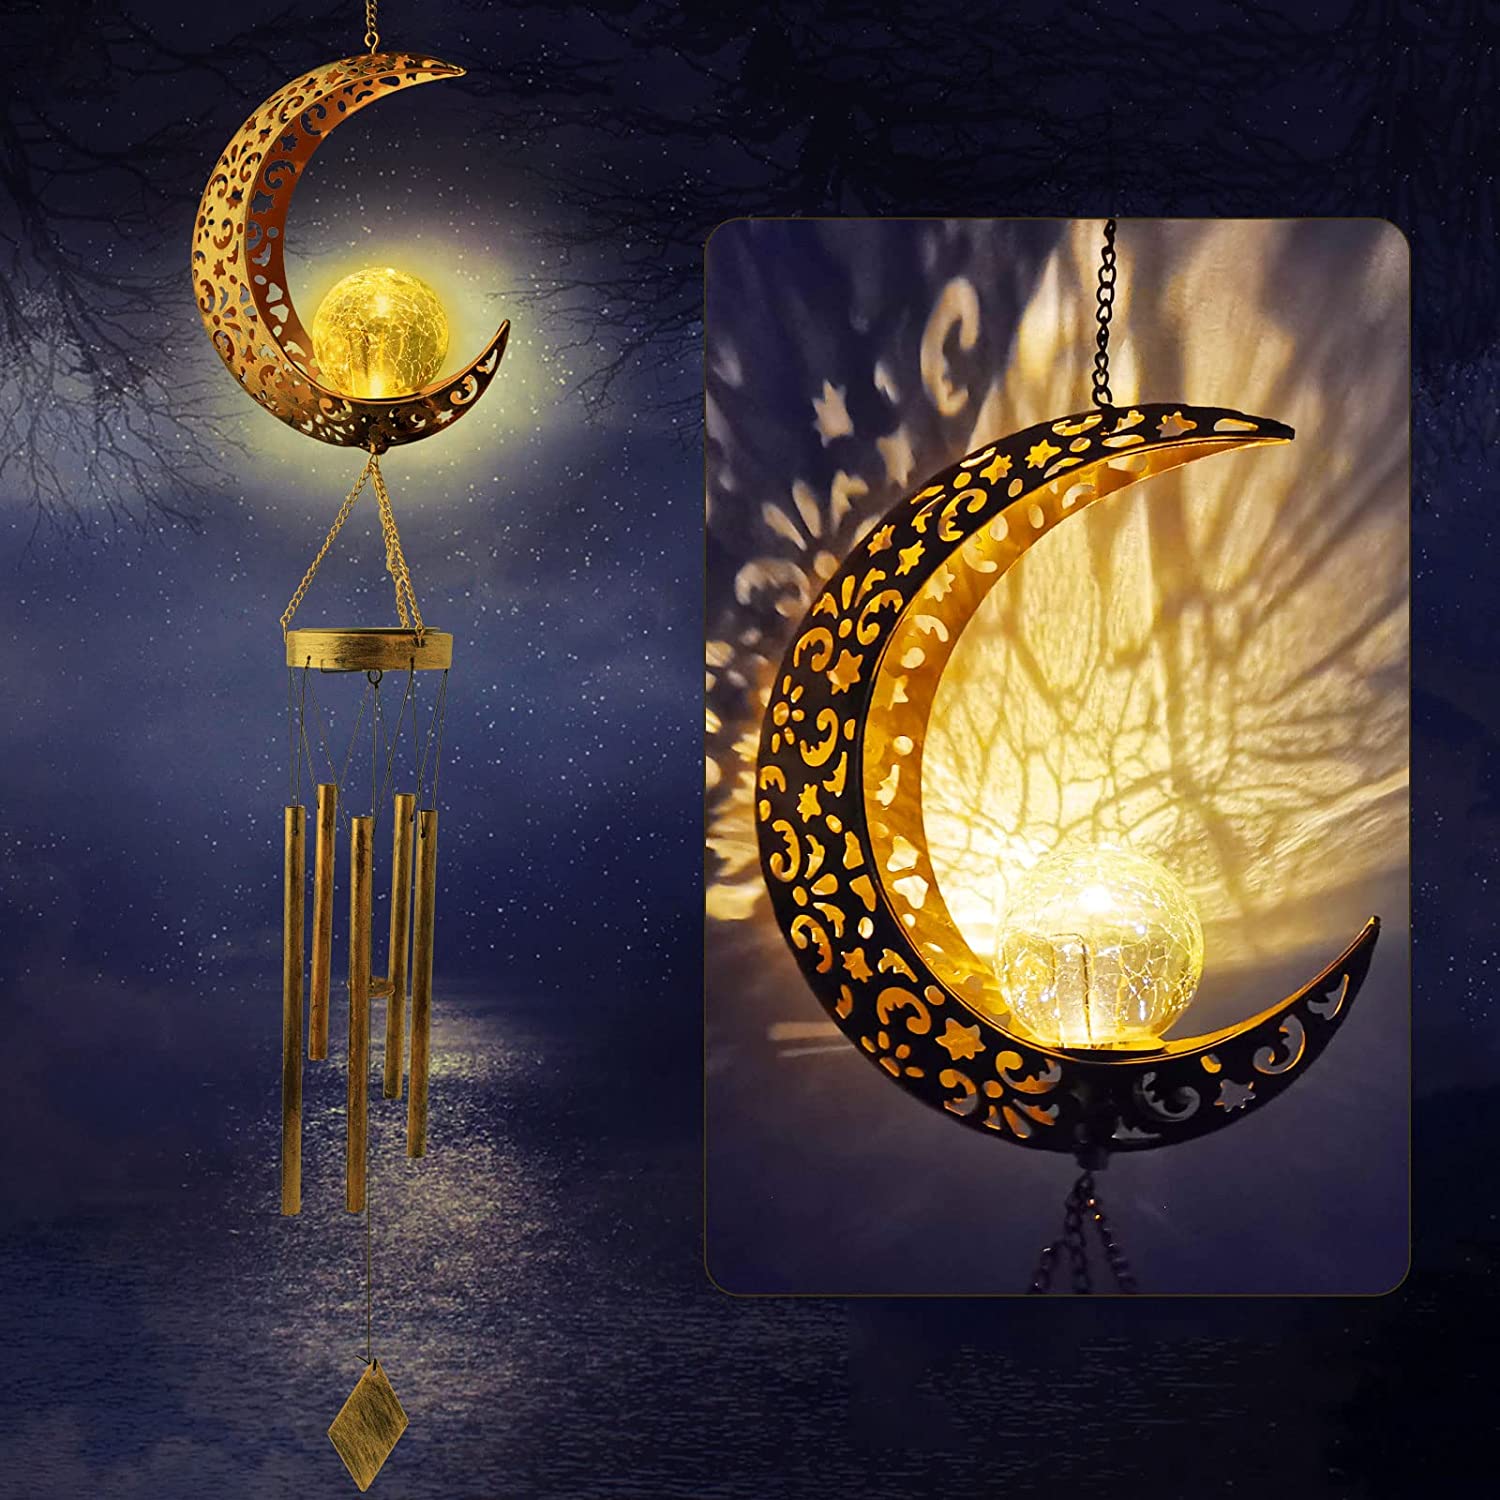 Solar Powered Outdoor Wind Chime with Soothing Melodies & Romantic Lighting